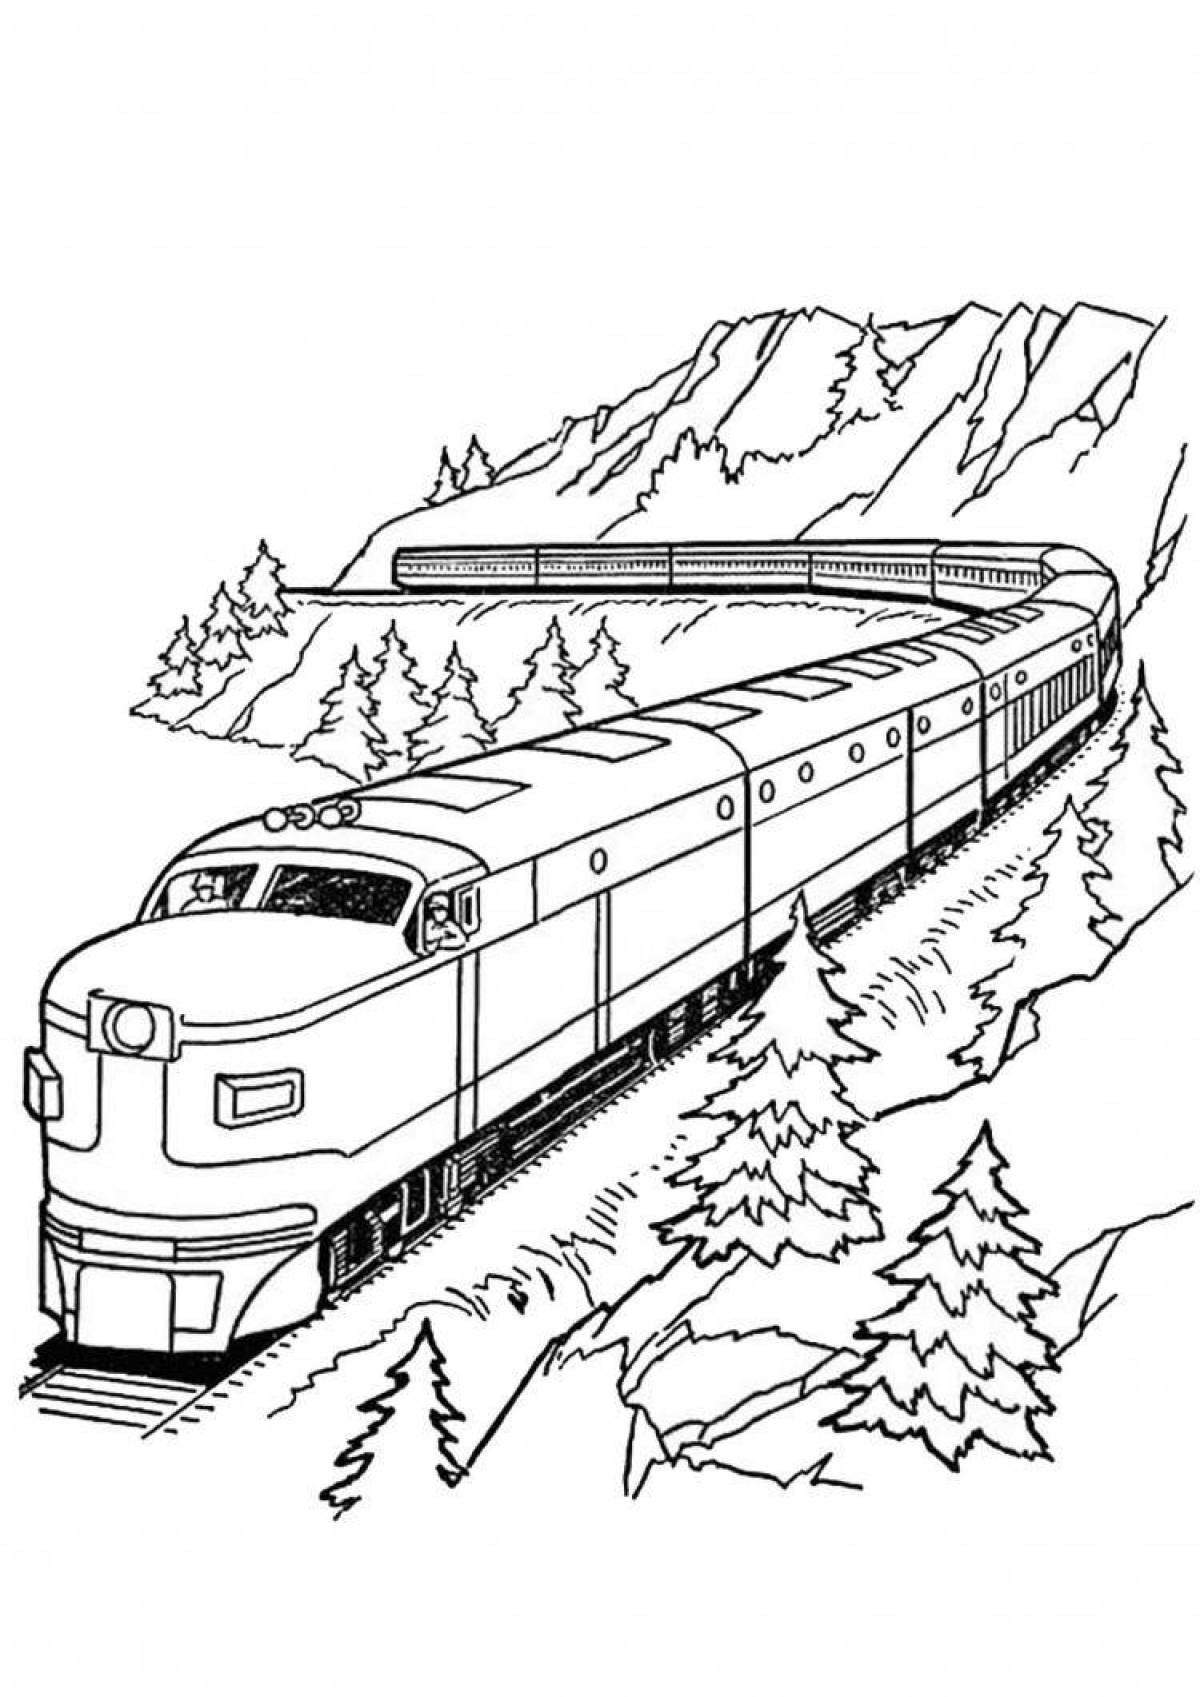 Intriguing train coloring book for kids